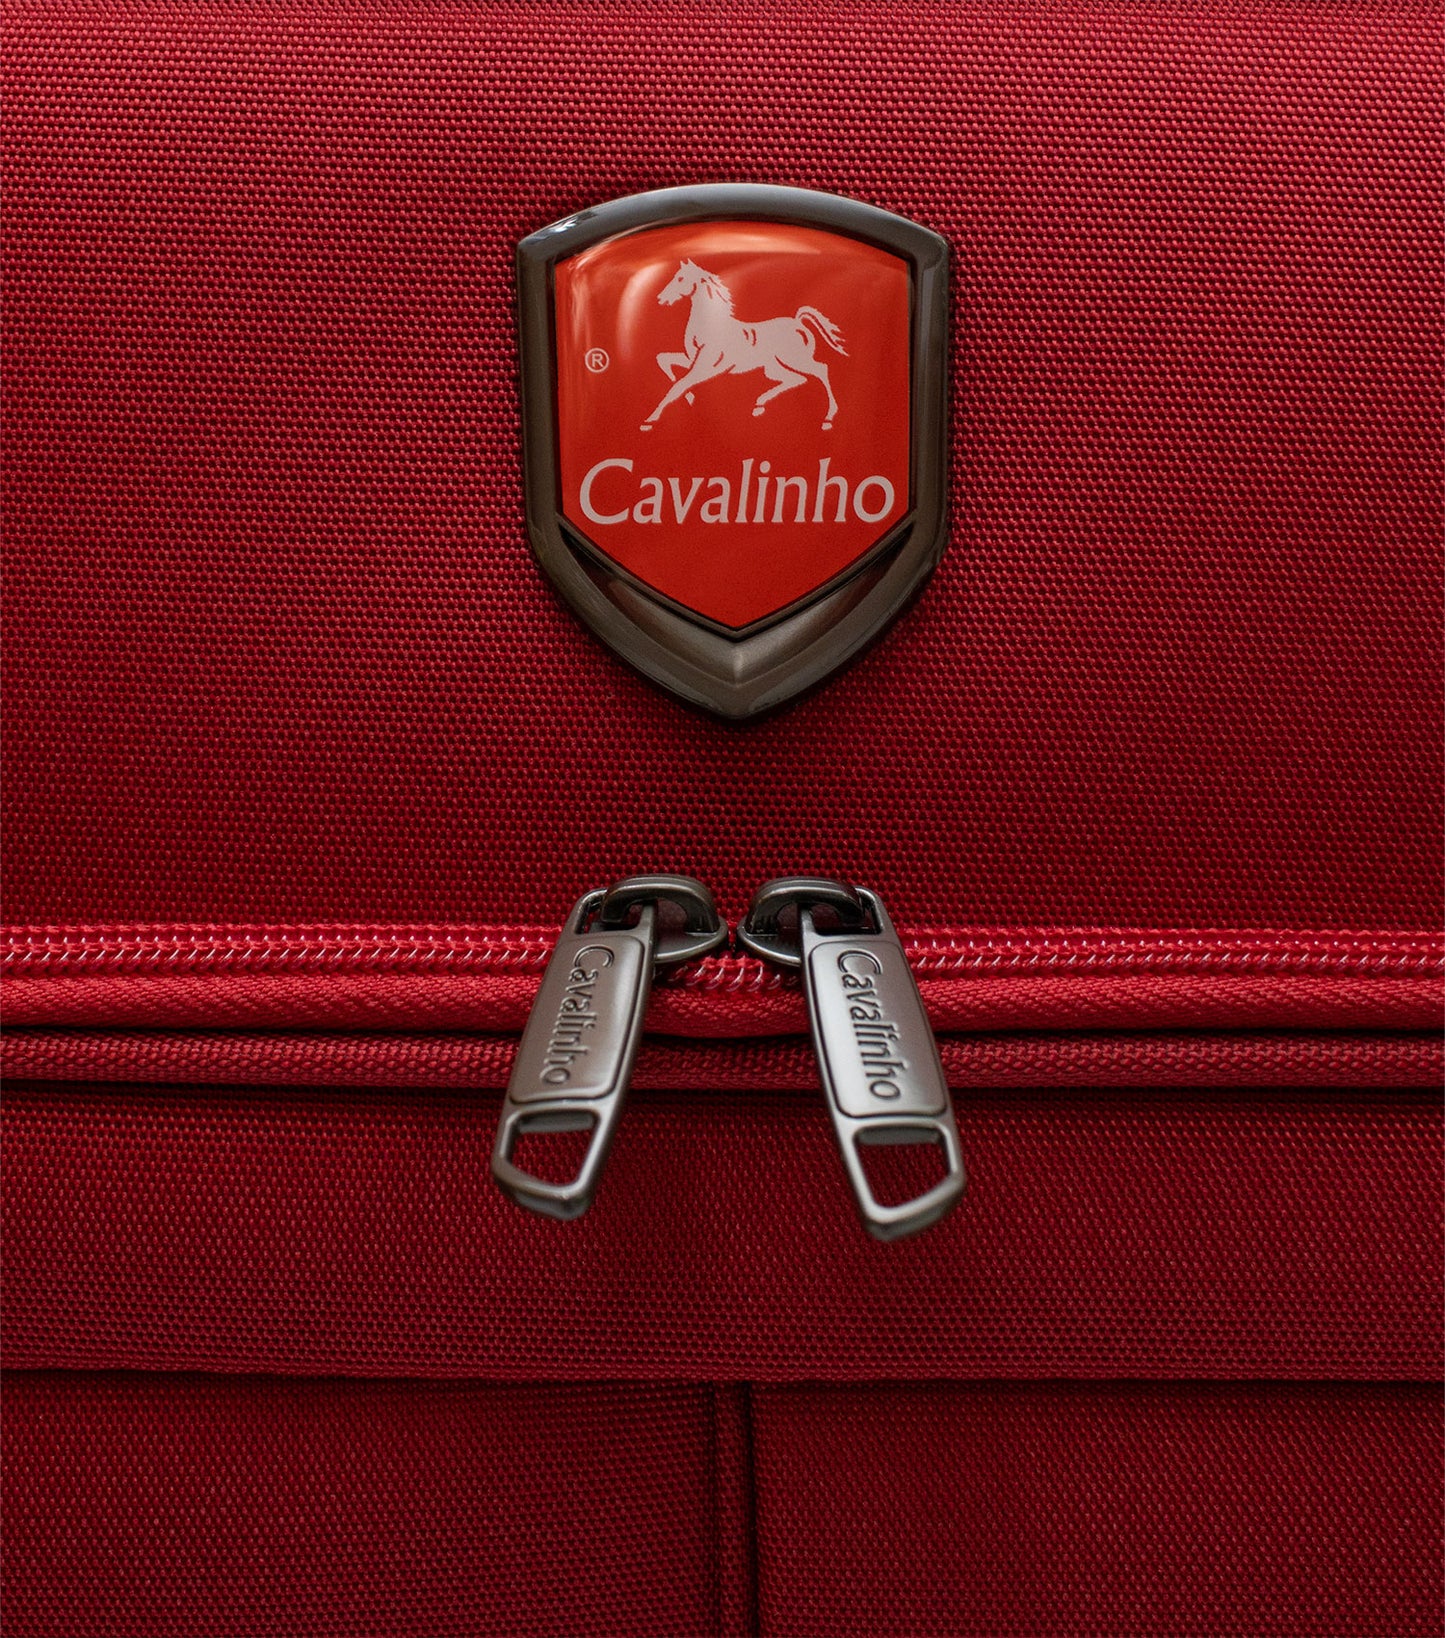 Cavalinho Carry-on Softside Cabin Luggage (16" or 19") - 16 inch Red - 68020003.04.16_P05